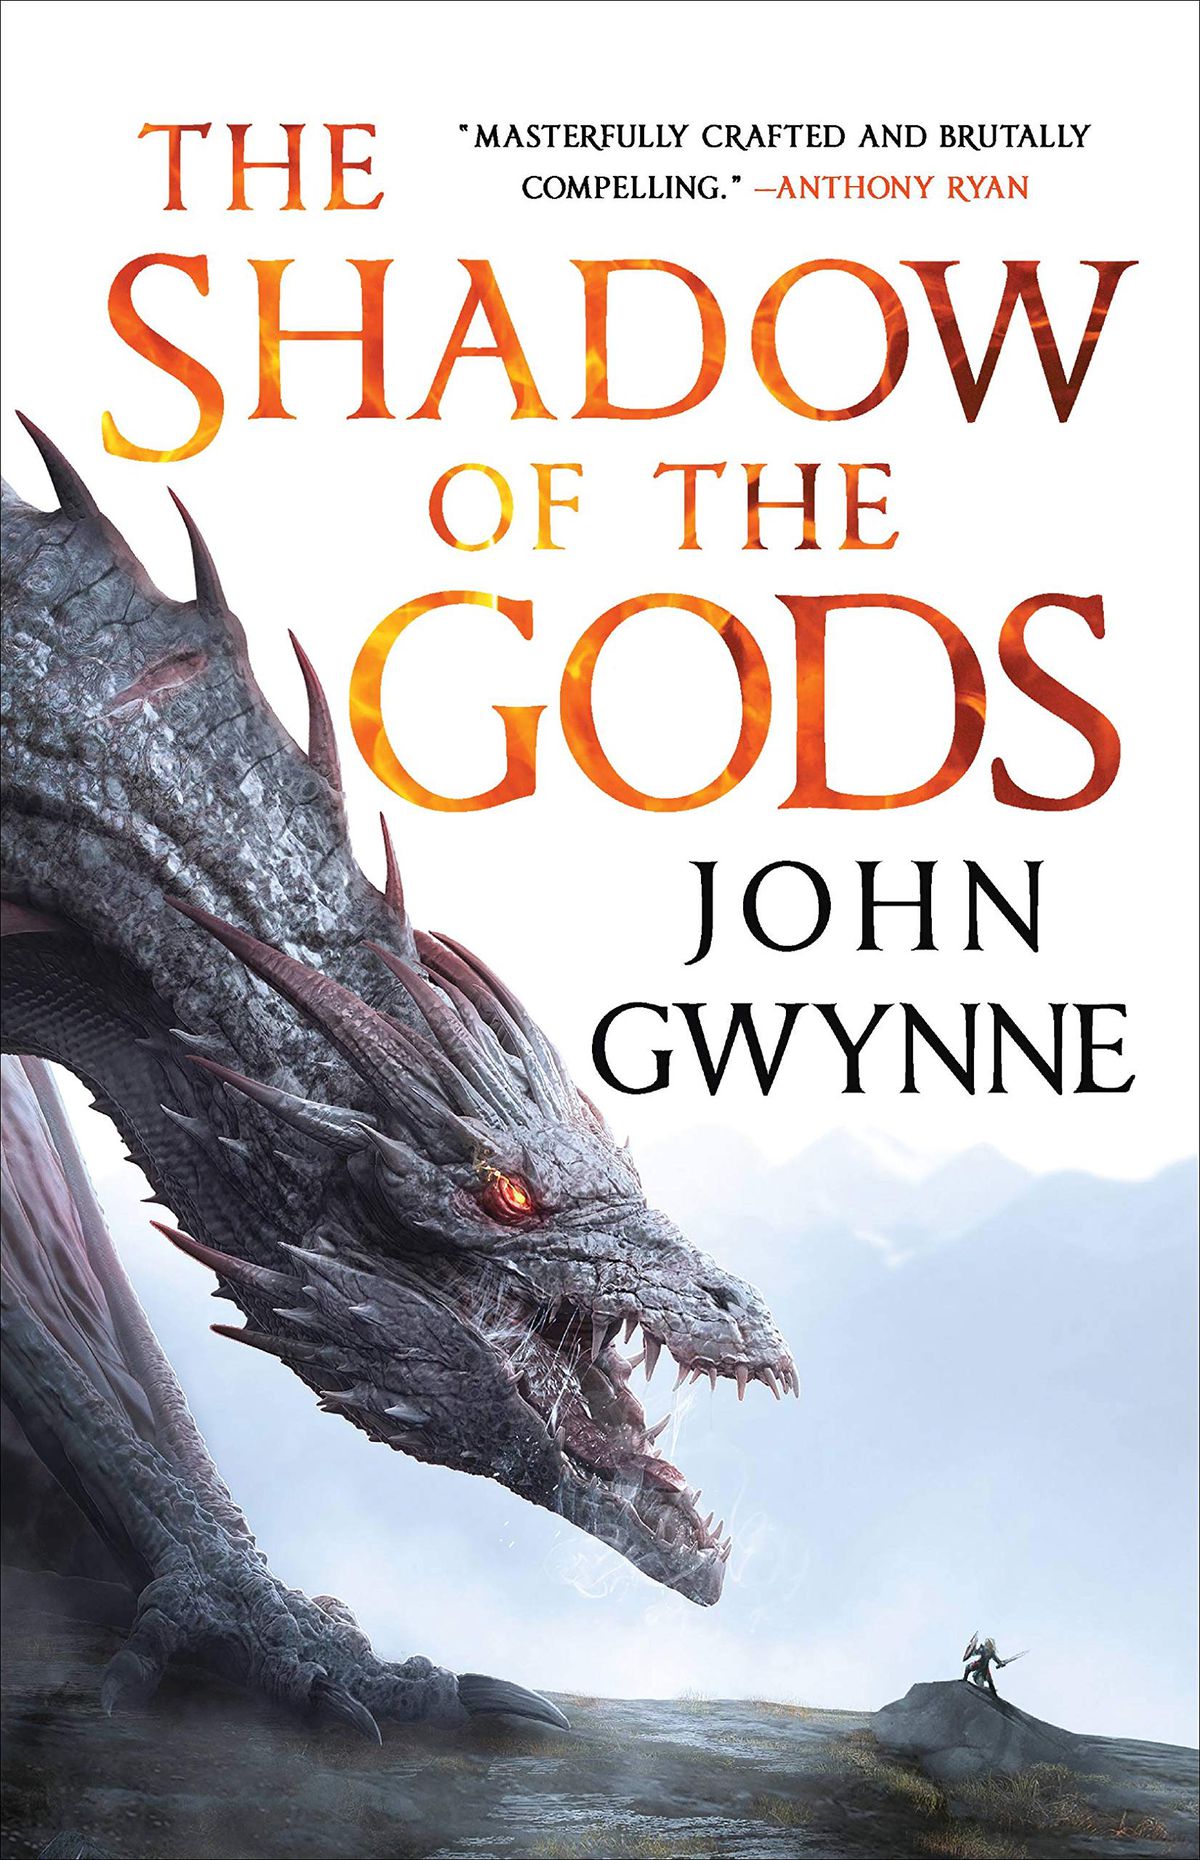 The cover for “The Shadow of the Gods” by John Gwynne which shows a large dragon and a small knight